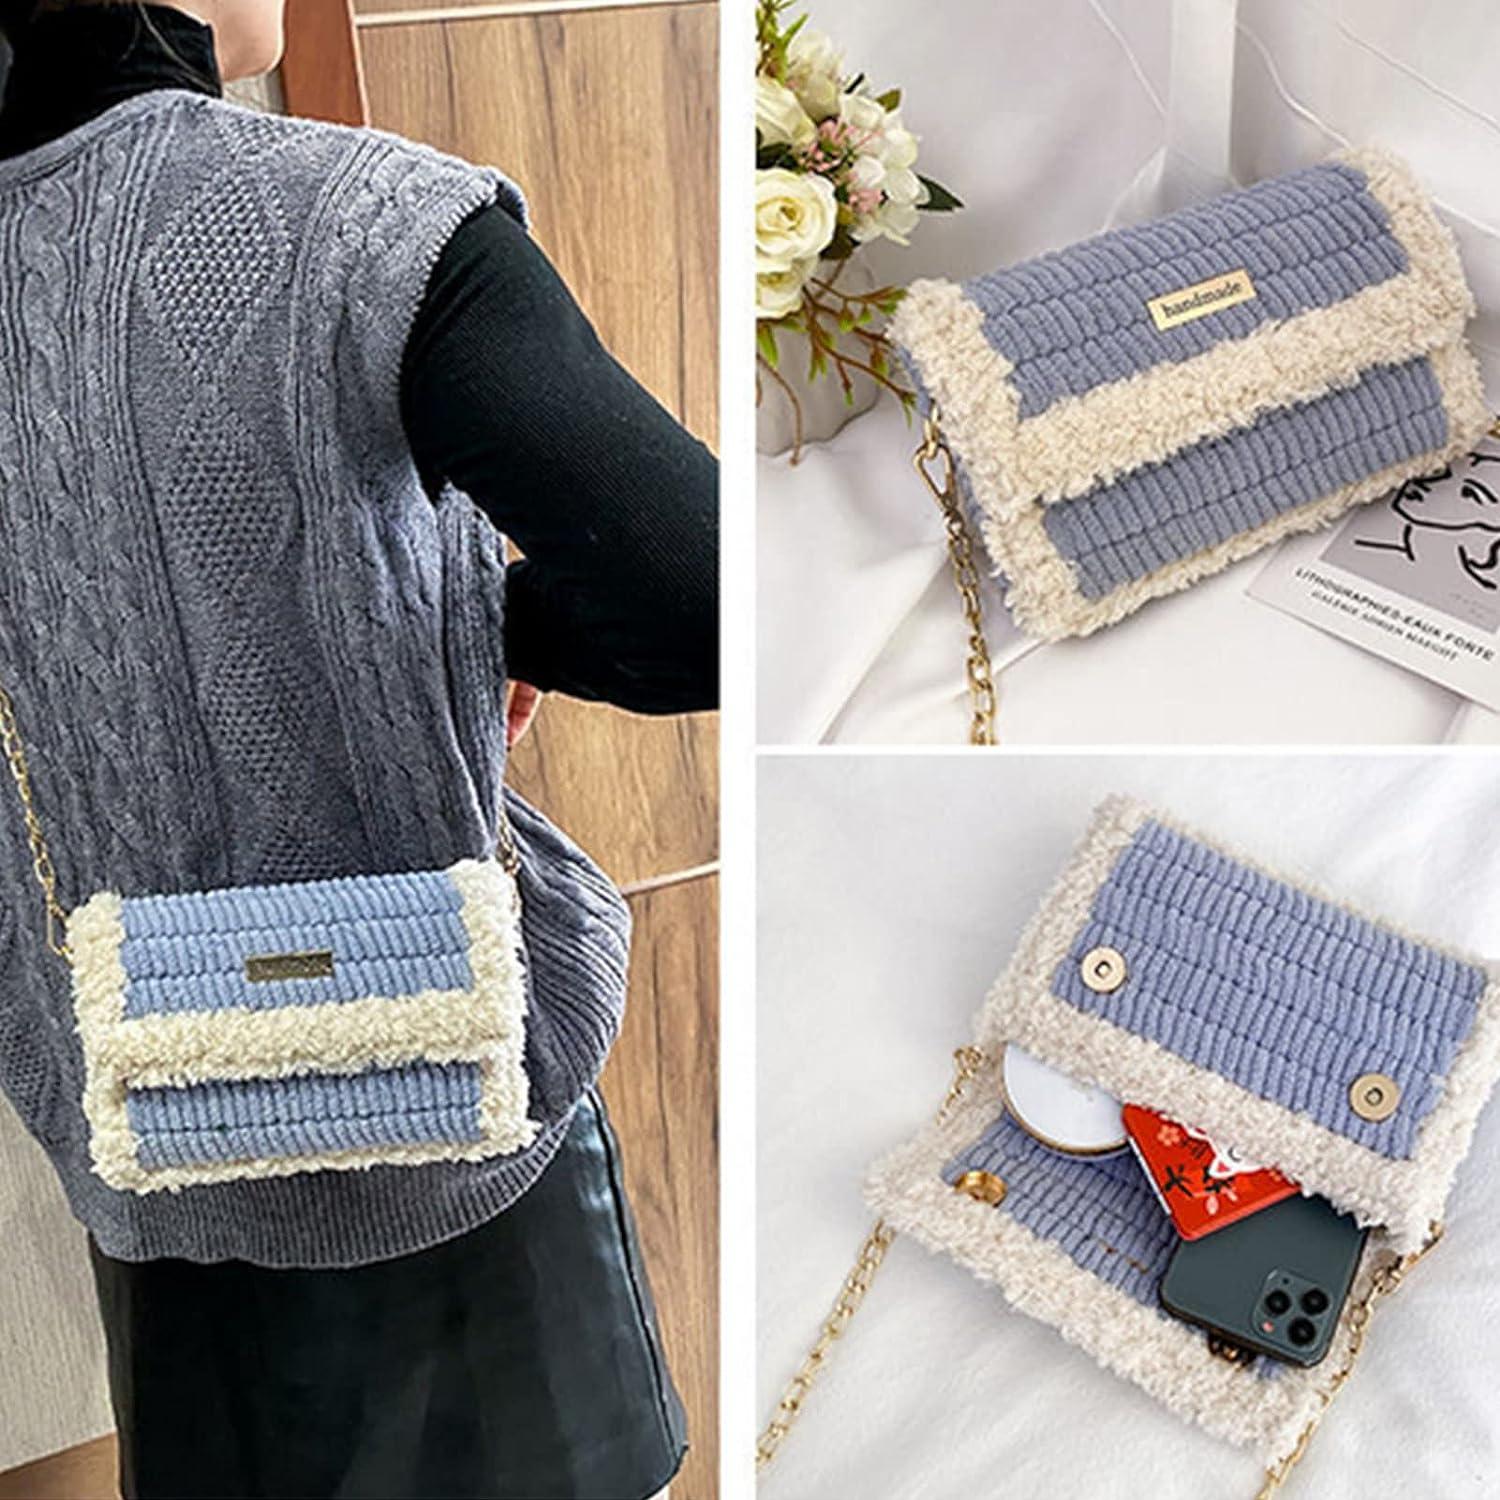 not my picture* what would do I add to my crochet bags to make them rigid  like this. Plastic canvas, is scarce in my country. What is a material that  is widely